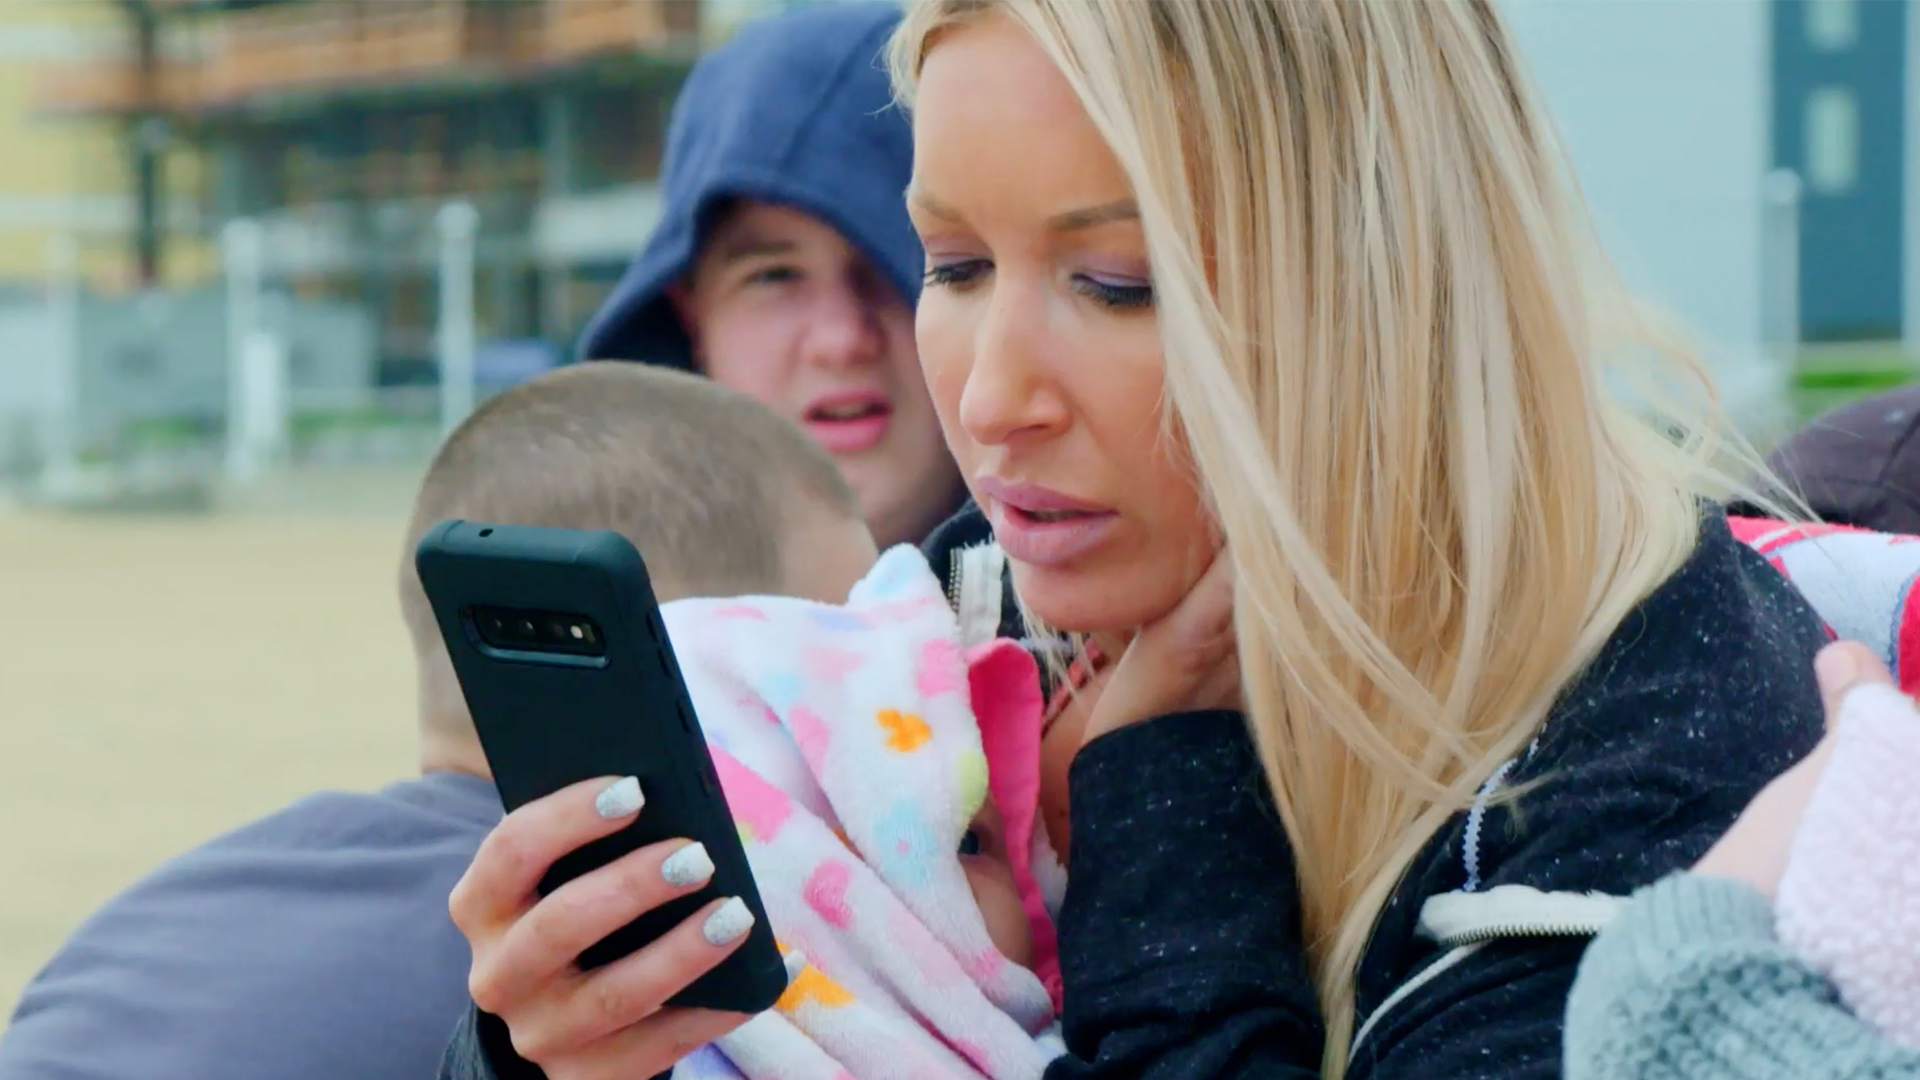 Watch Sneak Peek: Lacey Makes a Shocking Discovery on Shane’s Phone! | Life After Lockup Video Extras